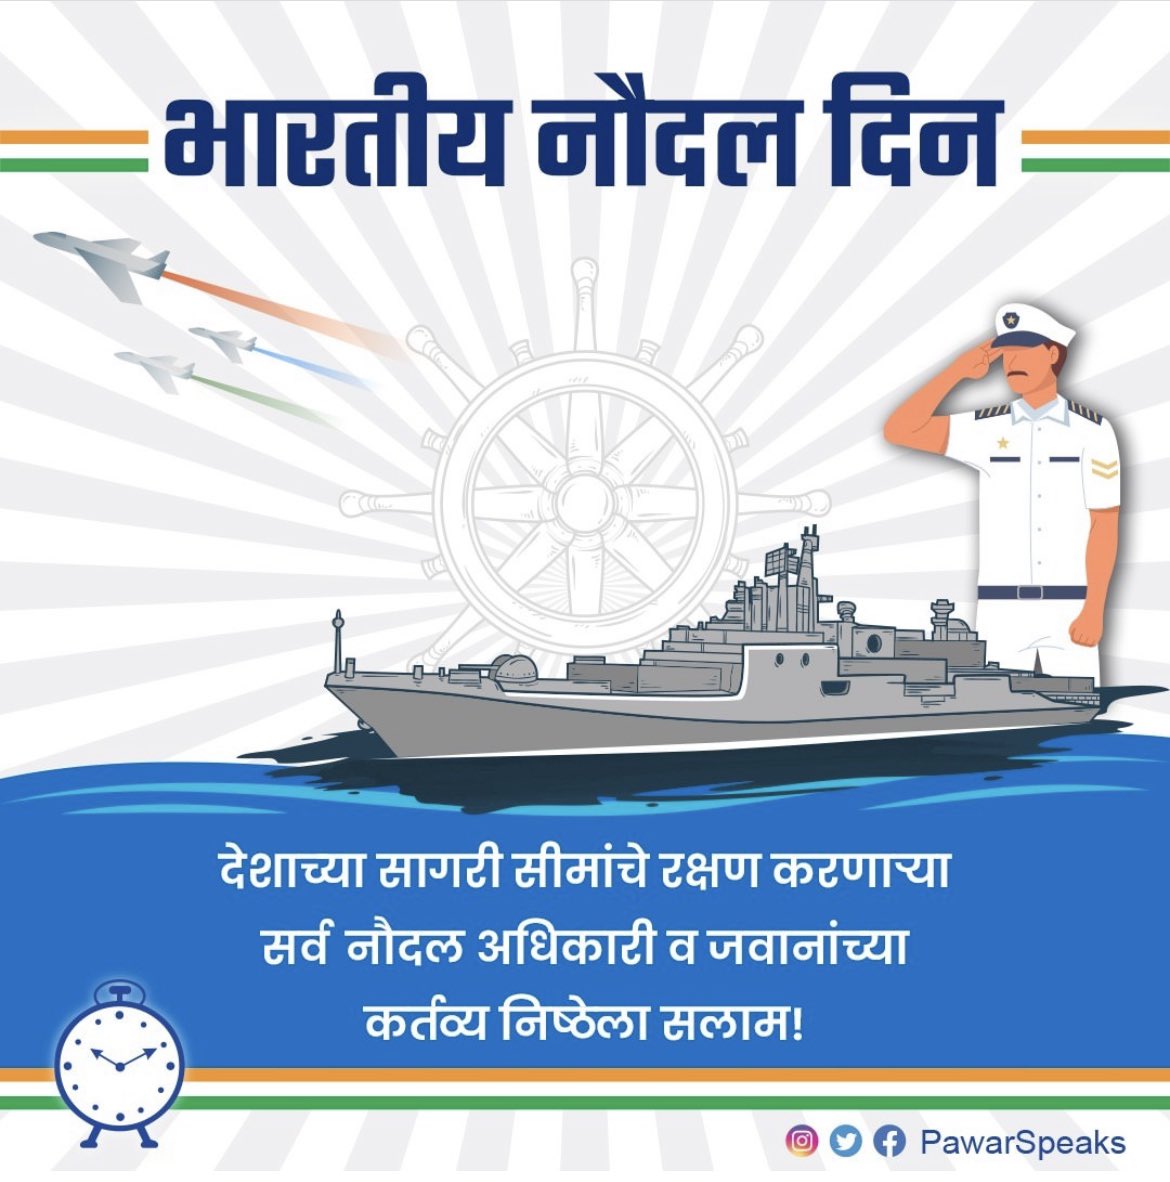 Salute to our Navy Forces for protecting our marine borders & safeguarding our Country with valour! 
#indiannavyday2022